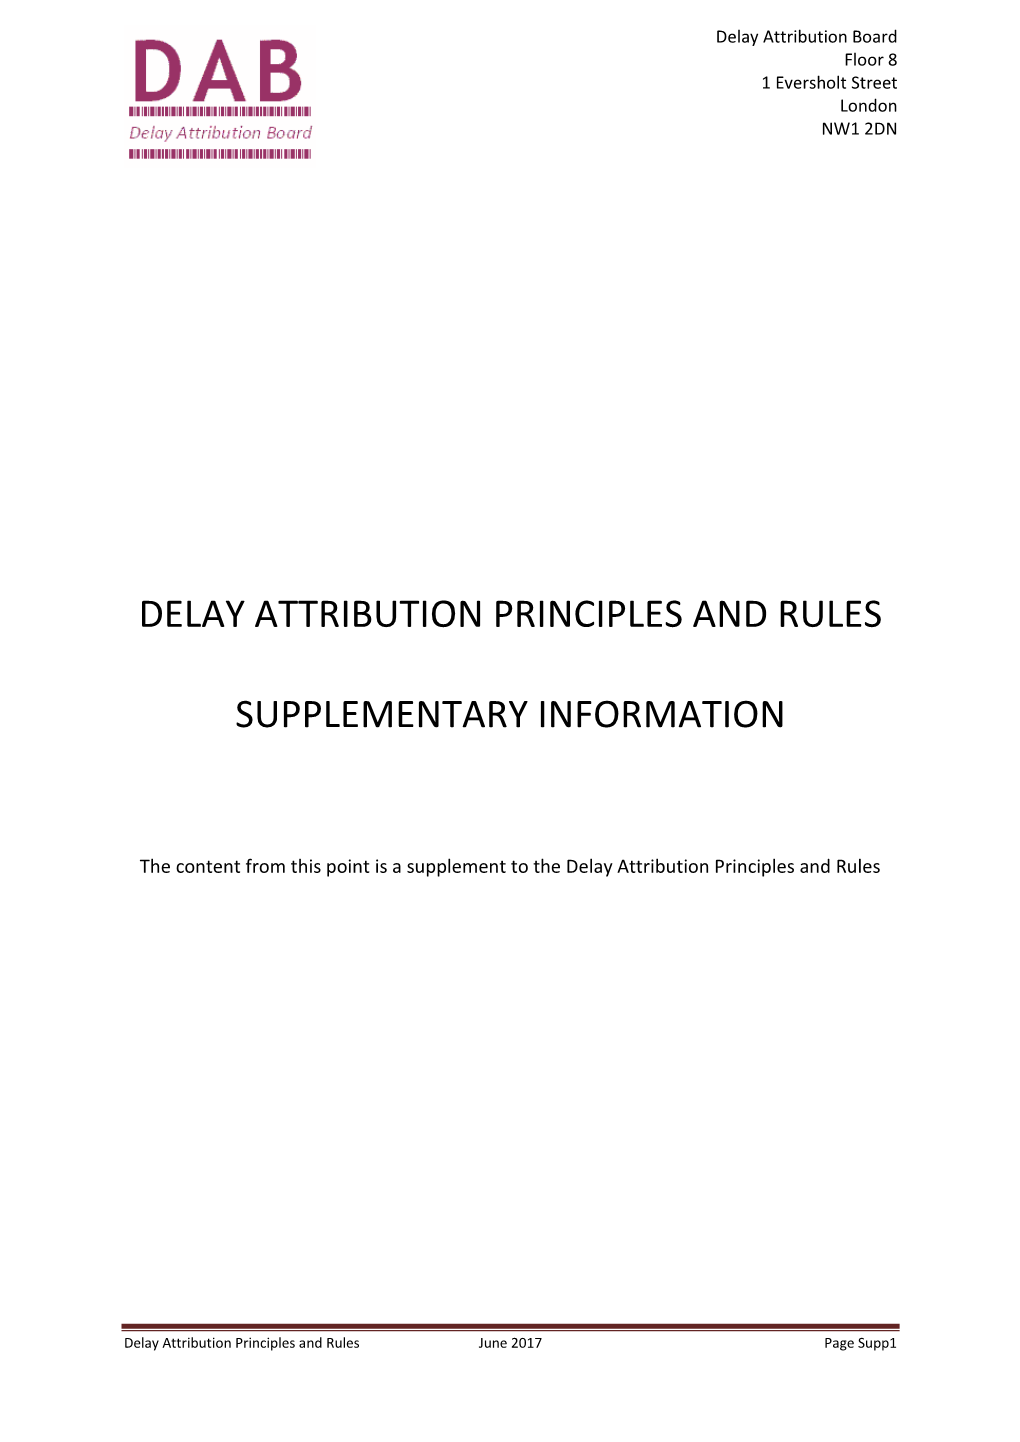 Delay Attribution Principles and Rules Supplementary